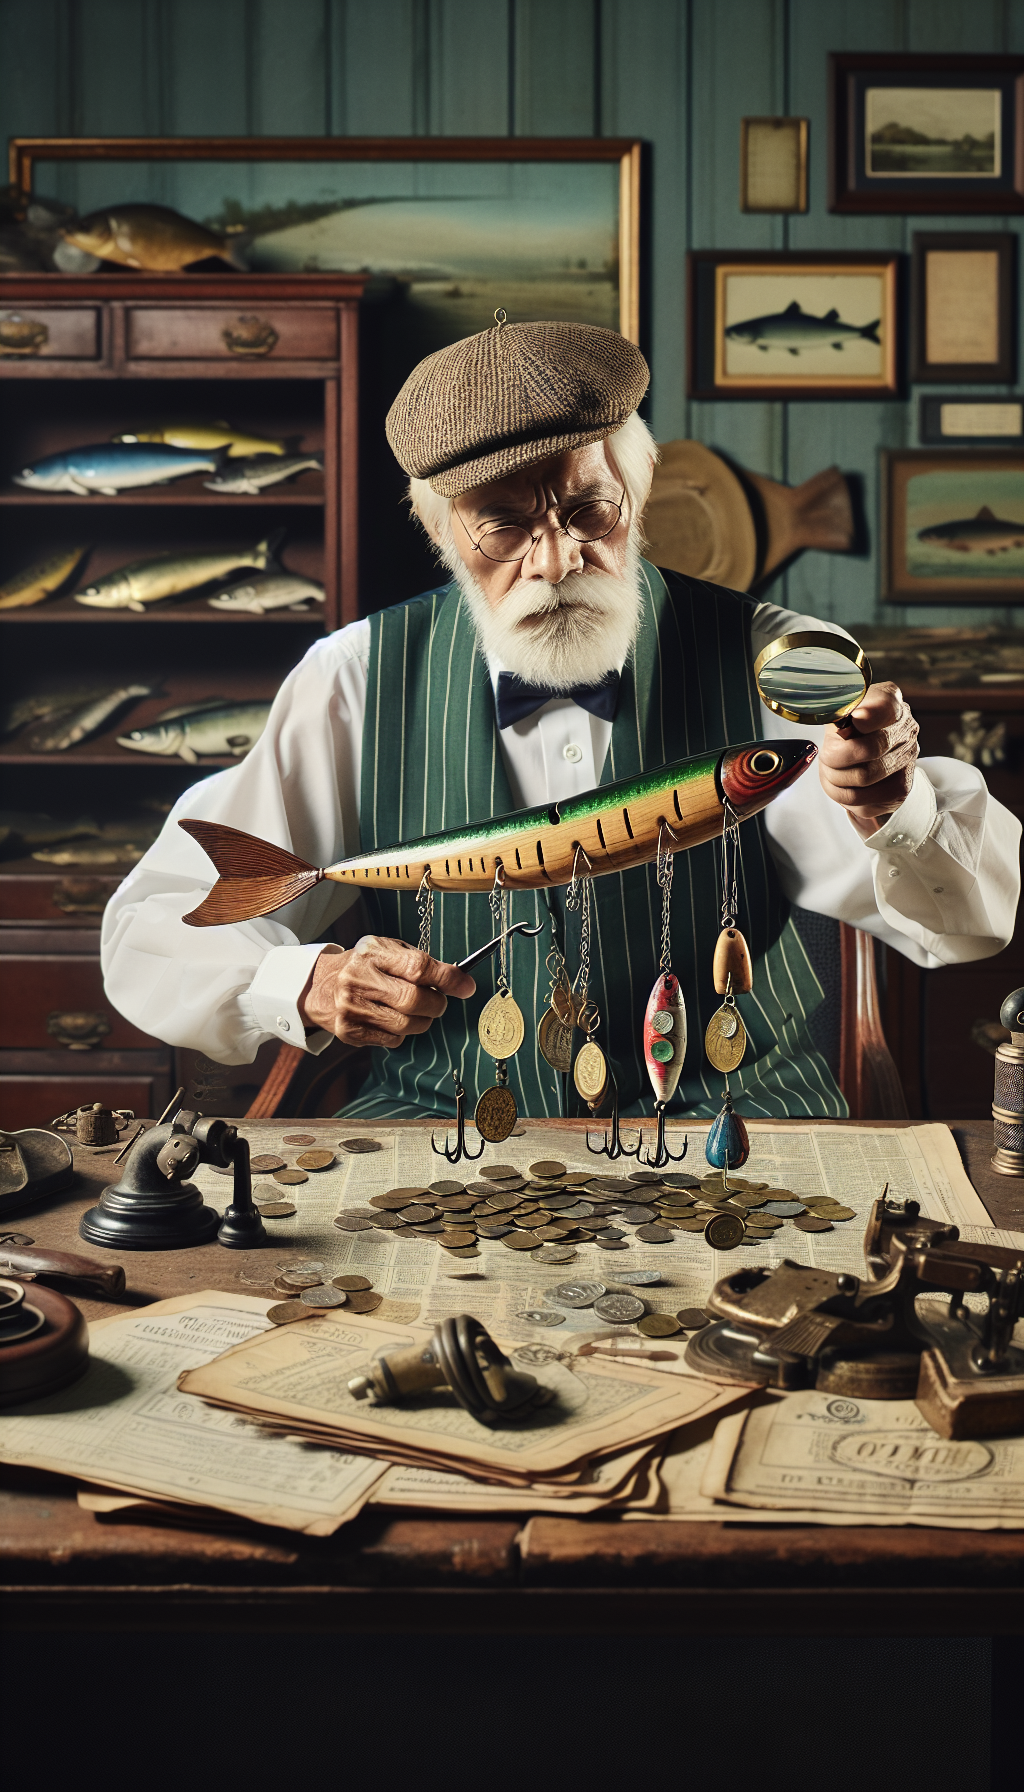 An elderly fisherman clad in vintage gear sits at an antique desk, magnifying glass in hand, inspecting a majestic wooden fishing lure. Coins and bills are entangled in its hooks, while a price tag dangles from its tail, reflecting the allure's unexpected fortune. The desk overflows with old fishing catalogs and appraisal tools, all amidst a backdrop of fishing memorabilia.